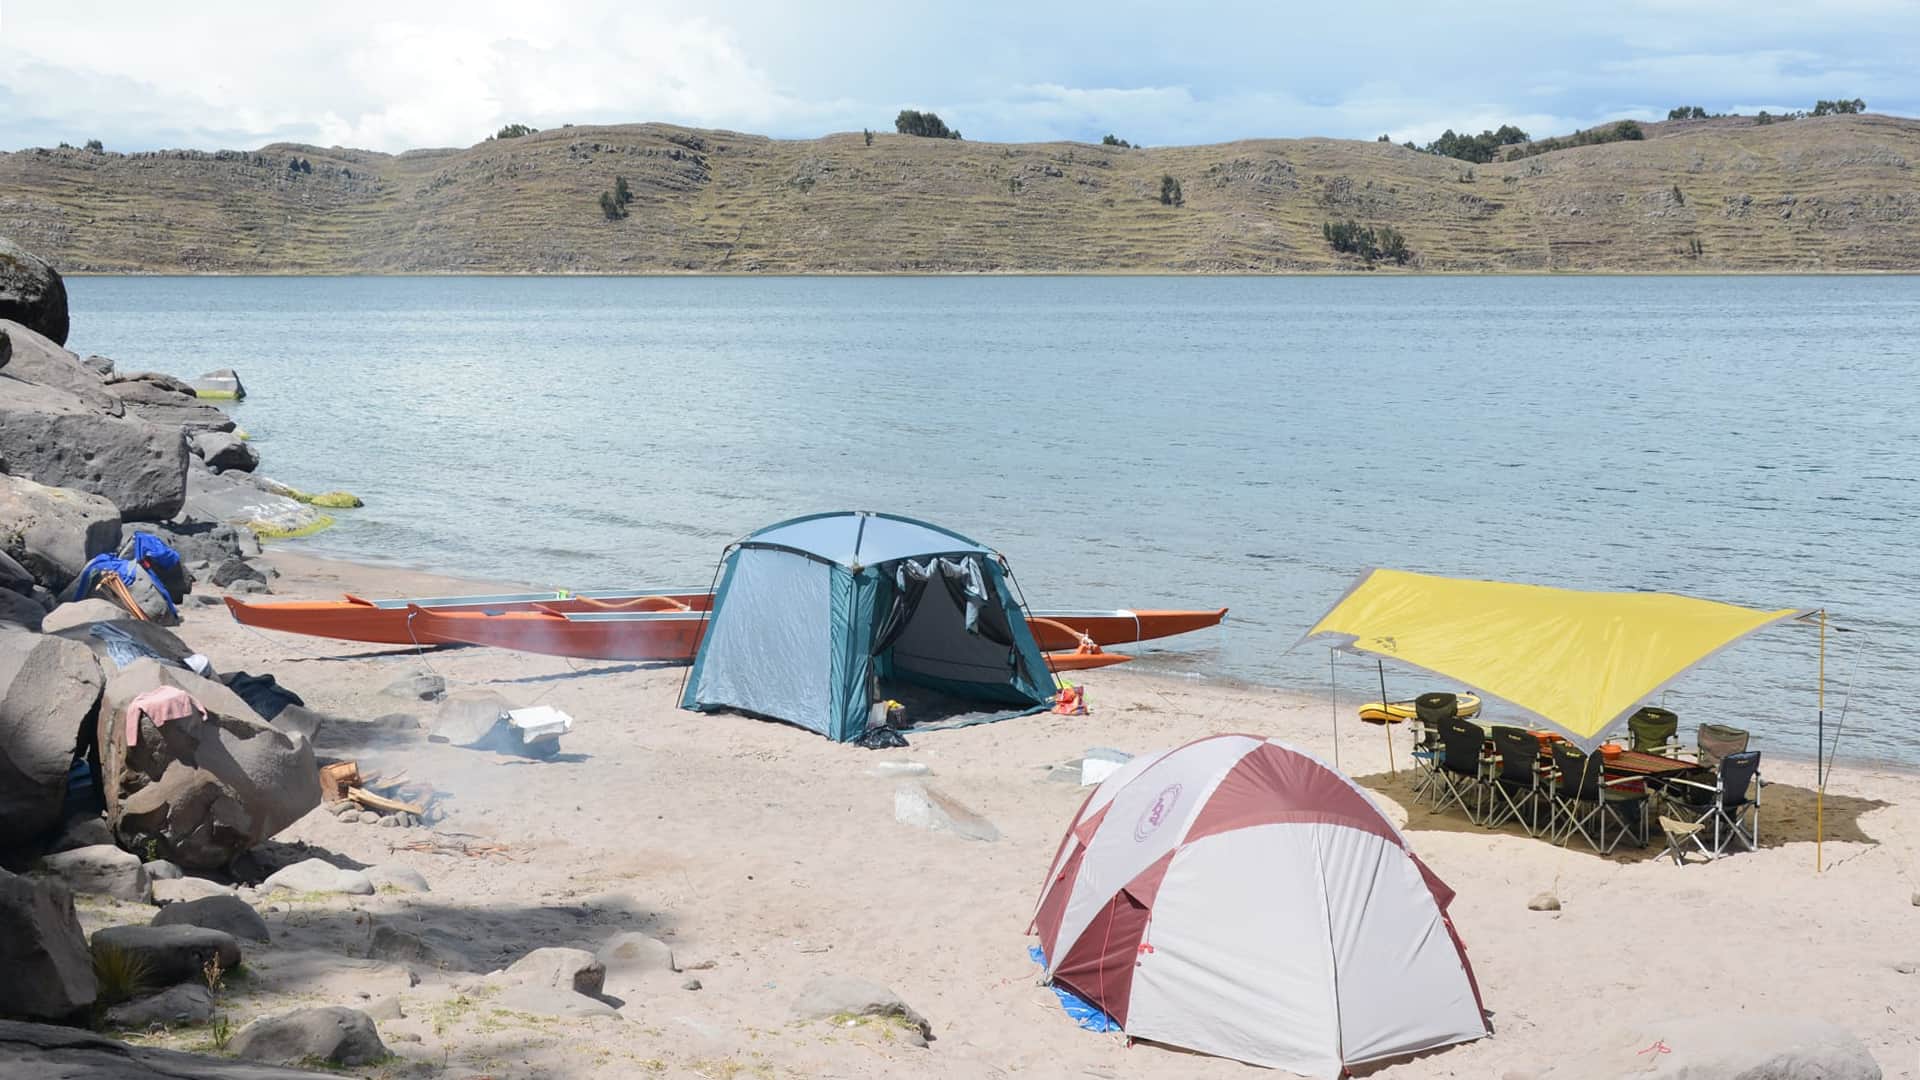 Paramis camping site with tents at the beach